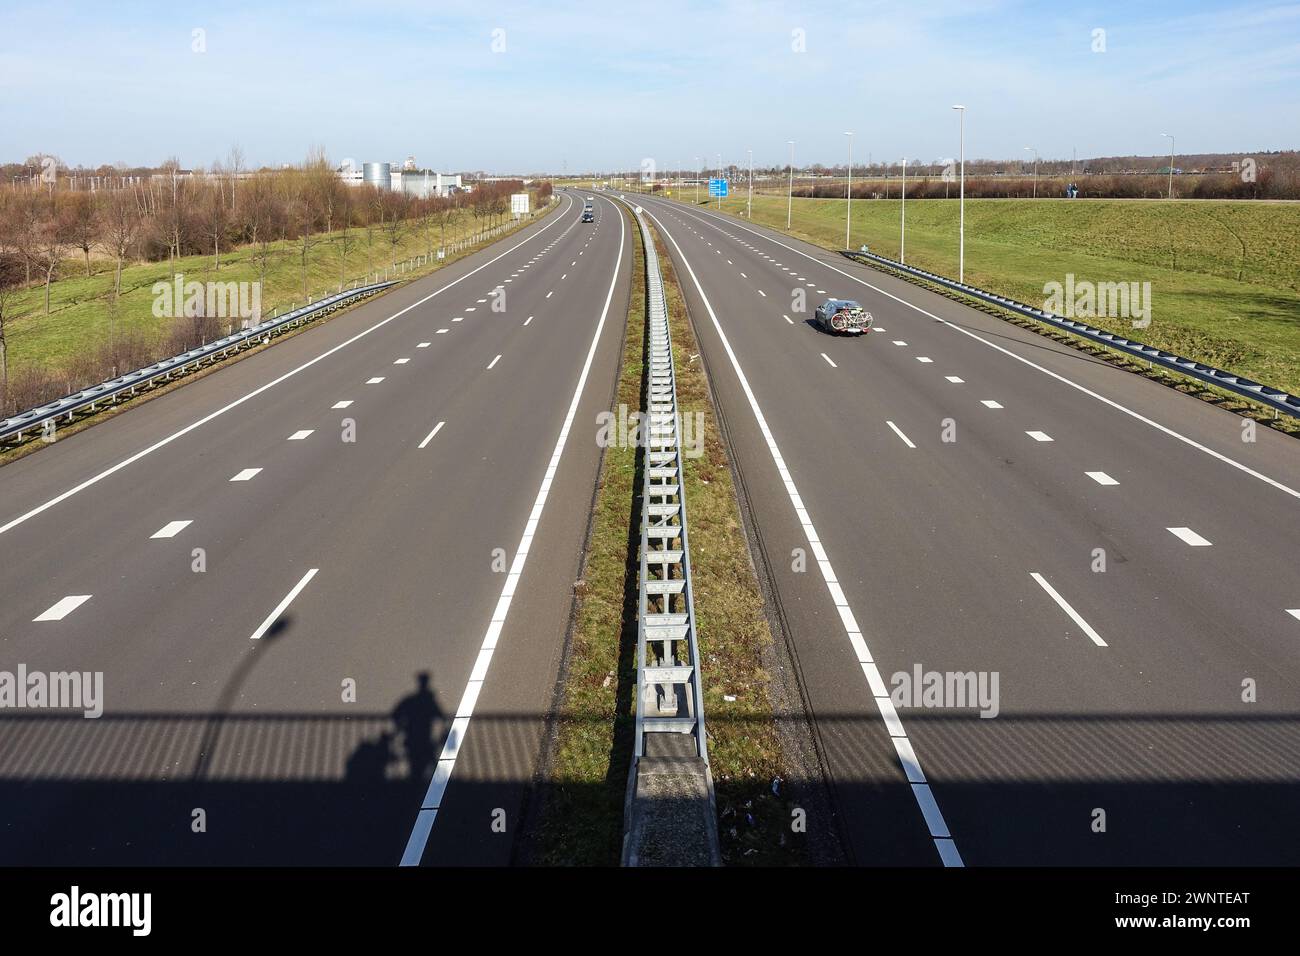 Empty multi-lane highway with traffic and green median strip in Limburg in the Netherlands, with the shadow of a man standing on a bridge above Stock Photo